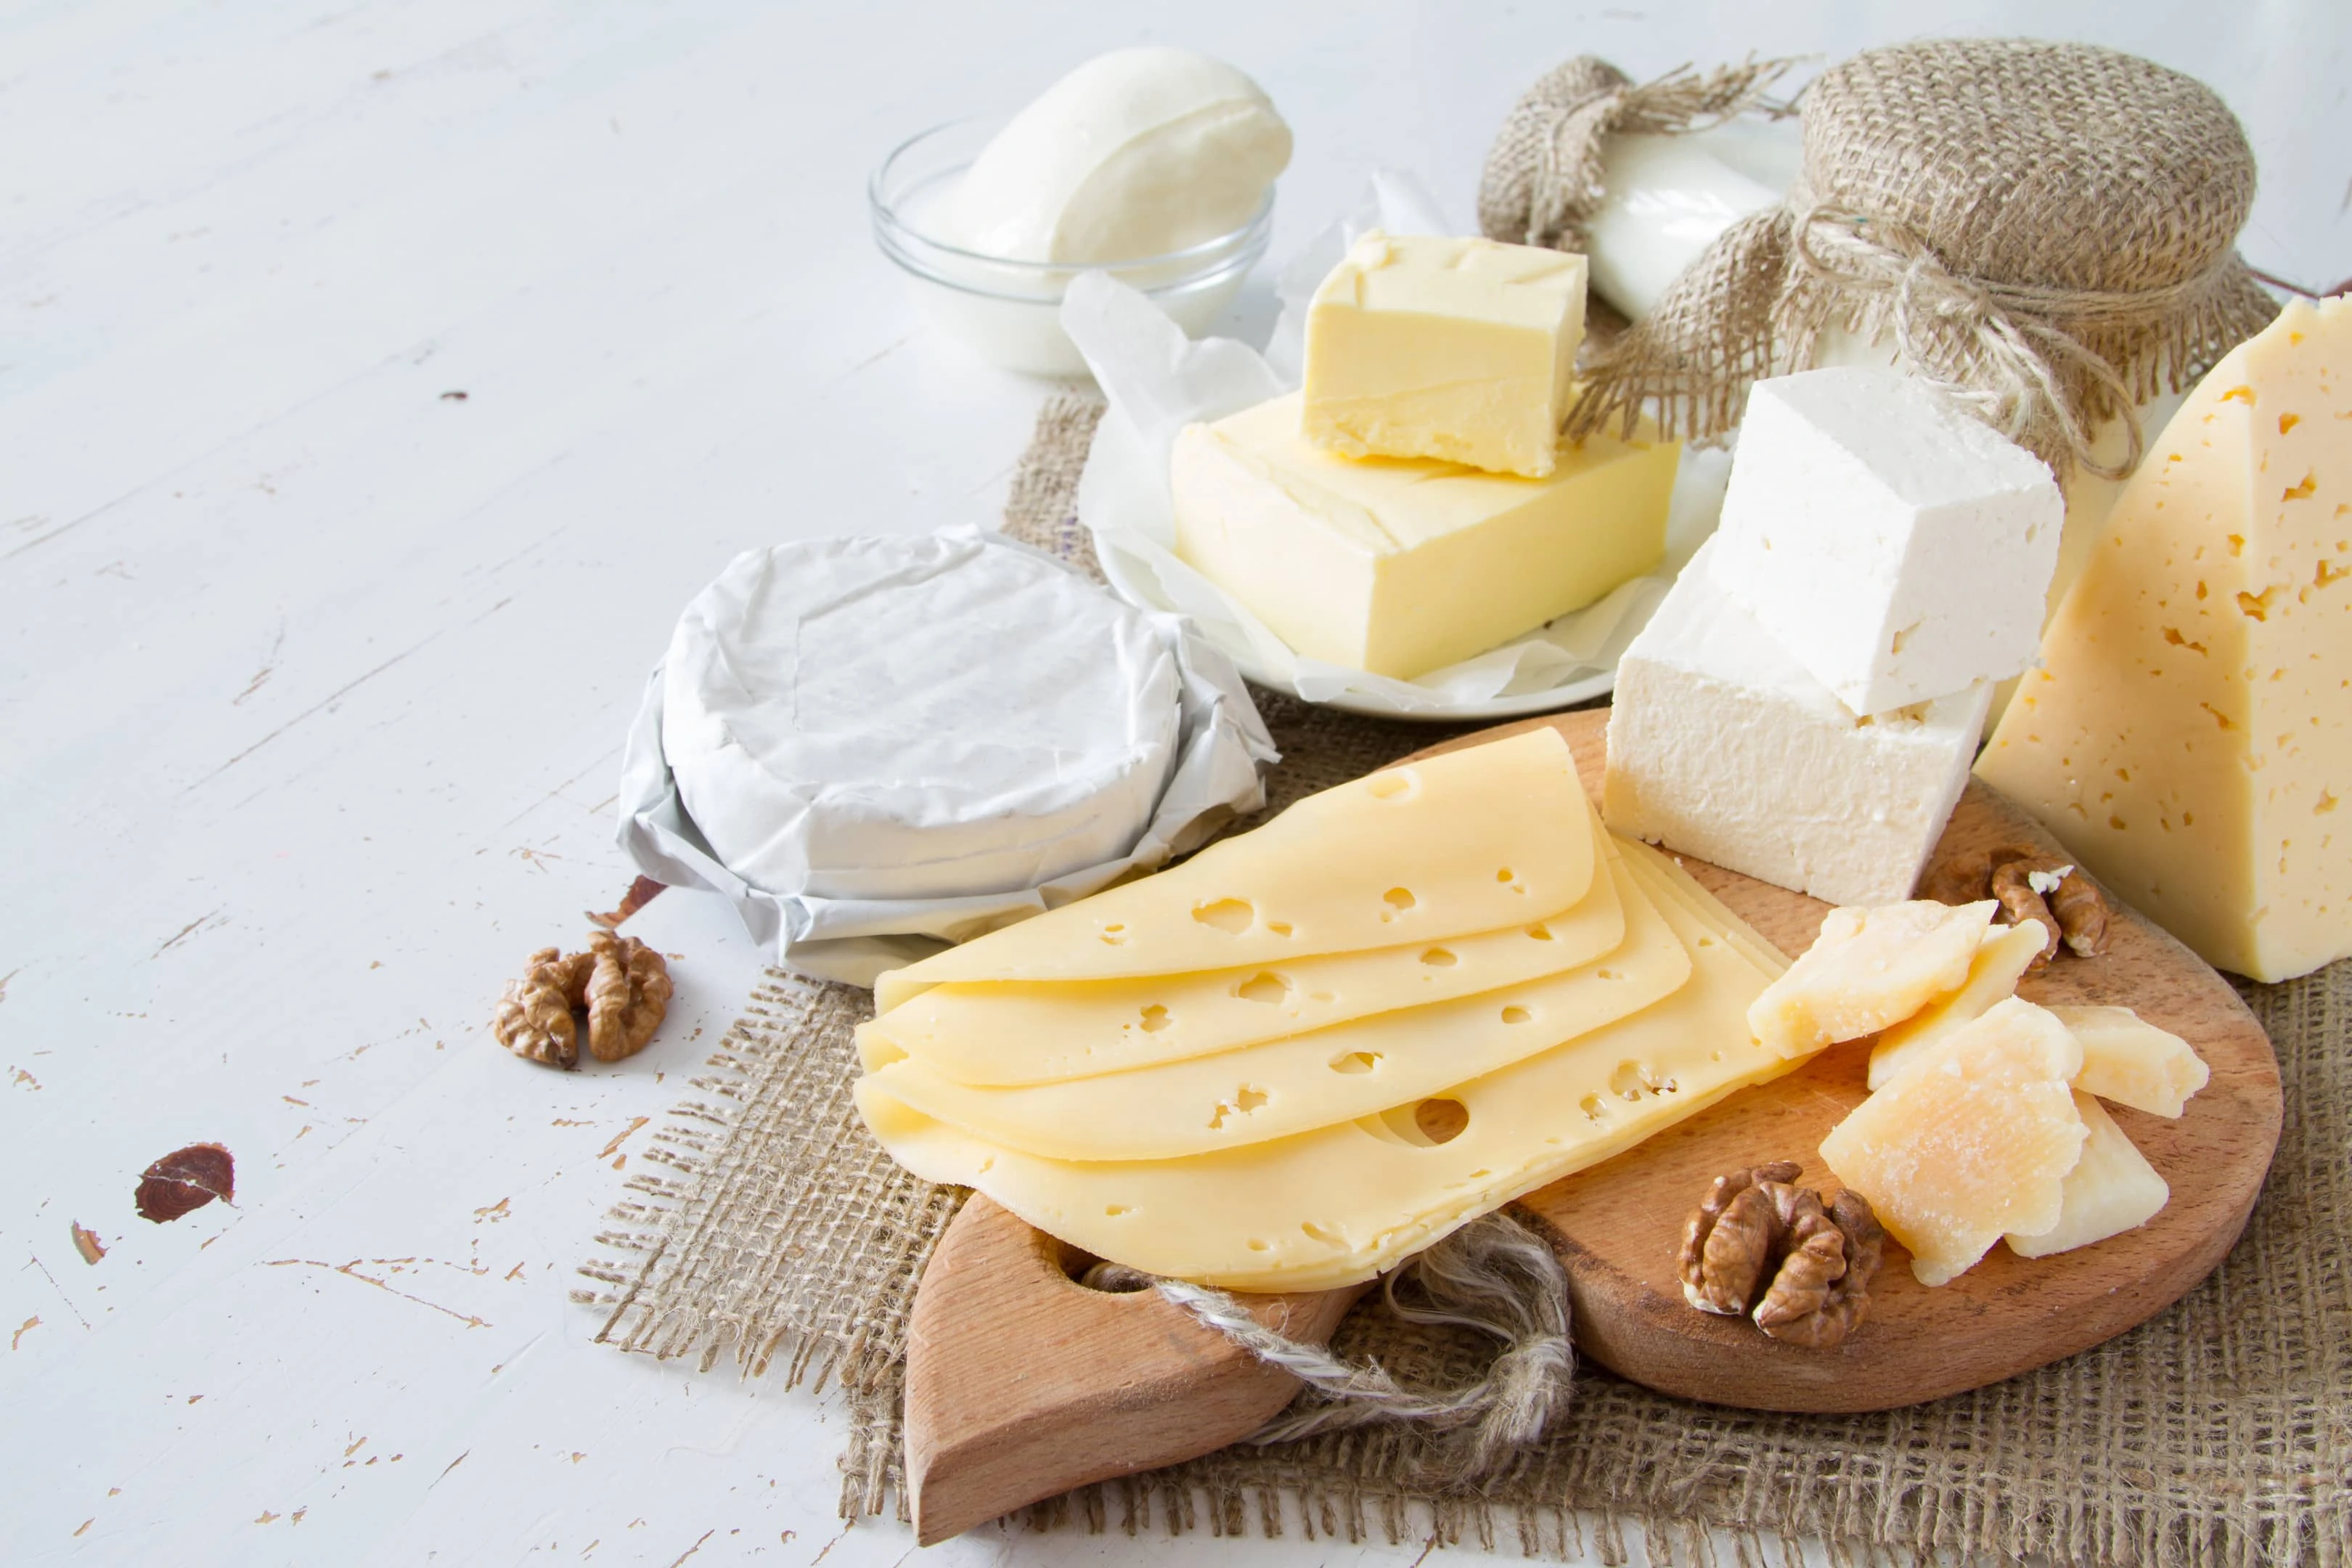 A selection of dairy products: cheese, milk and yogurt. Dairy is one on our list of foods to avoid before drug test.